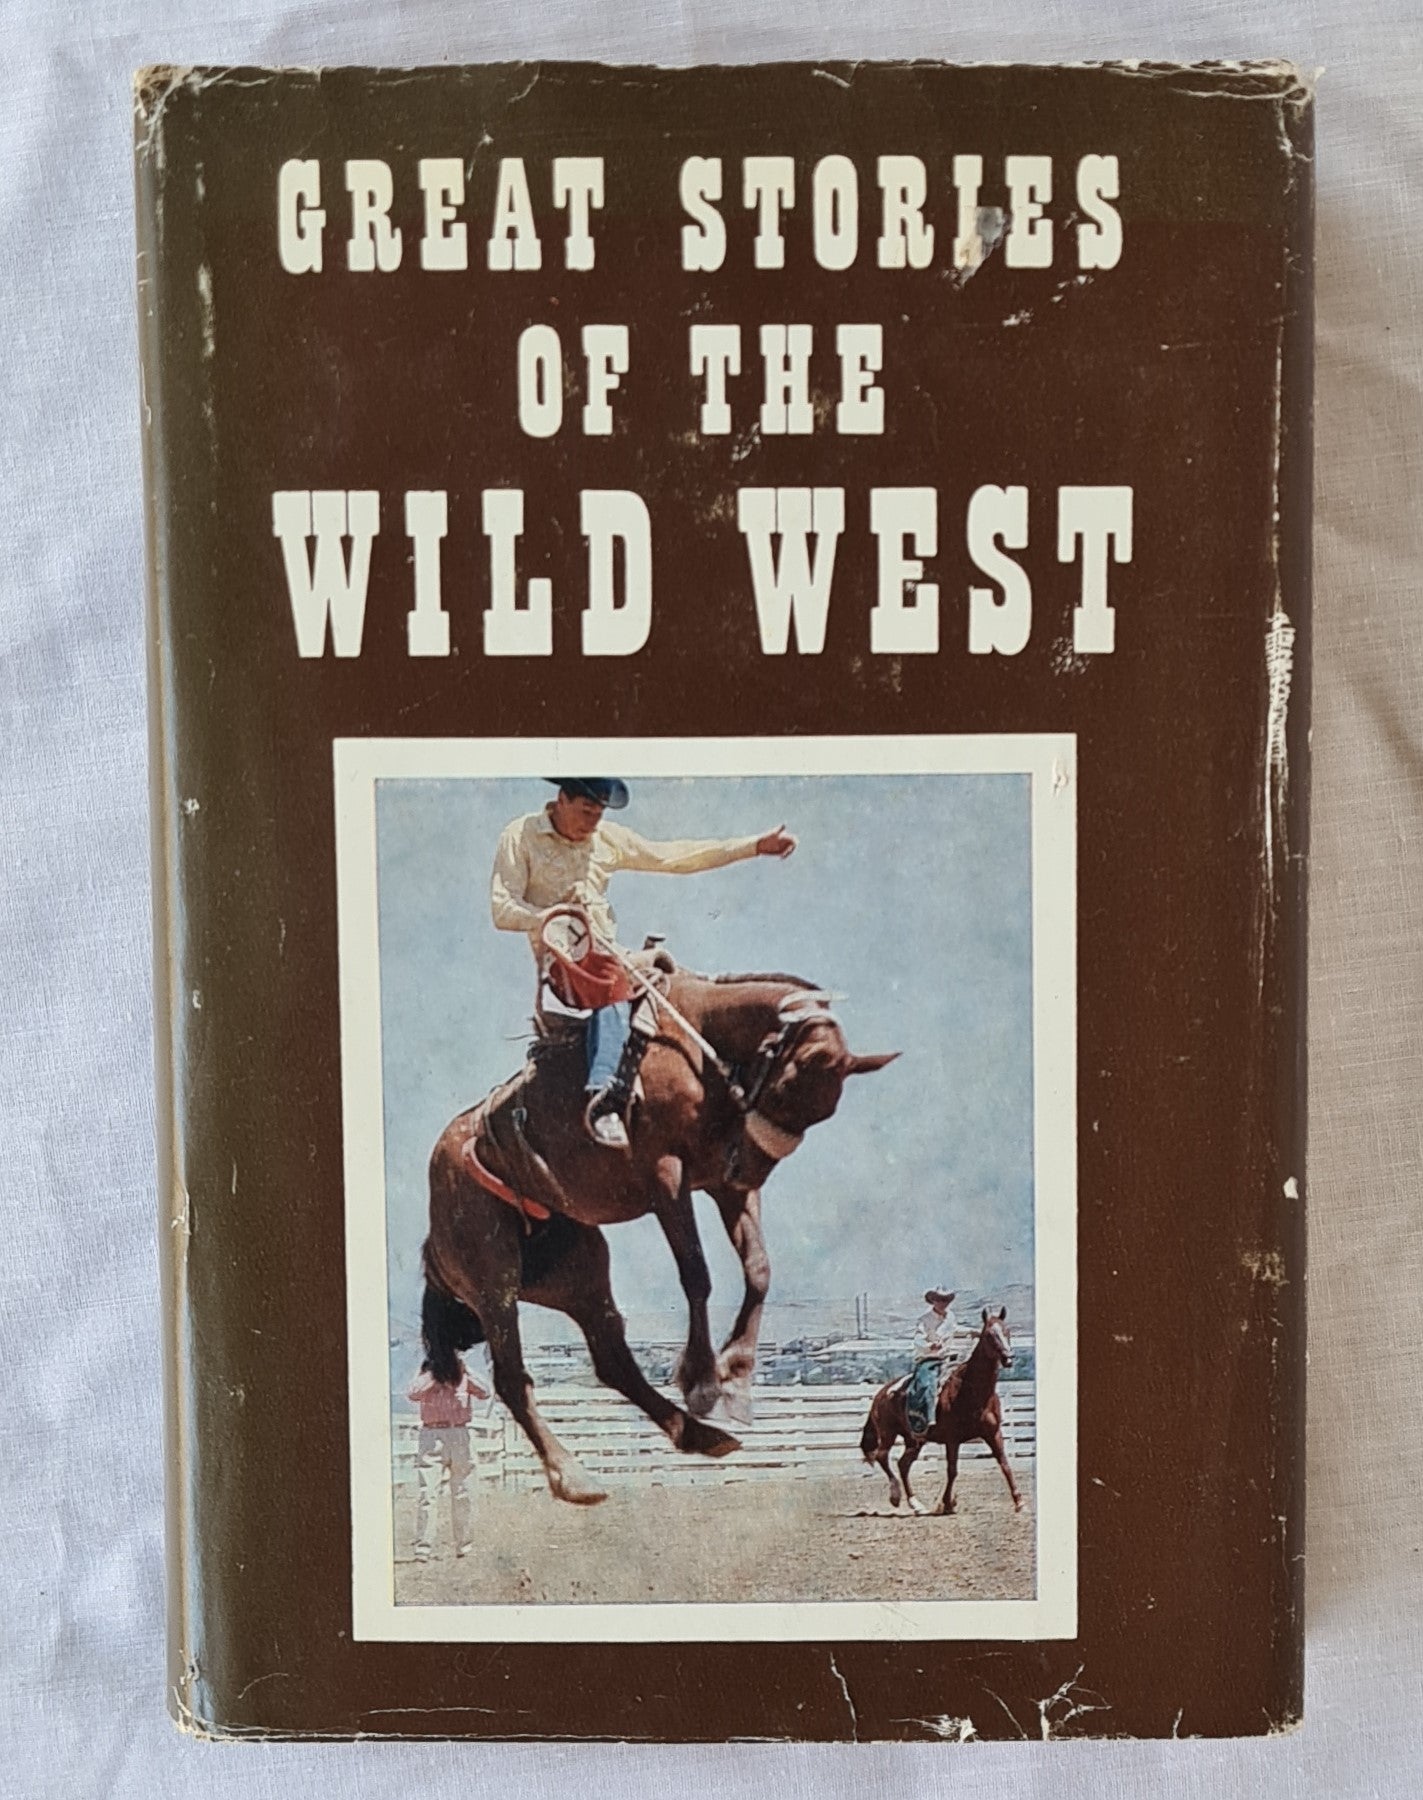 Great Stories of the Wild West by Paul Benson